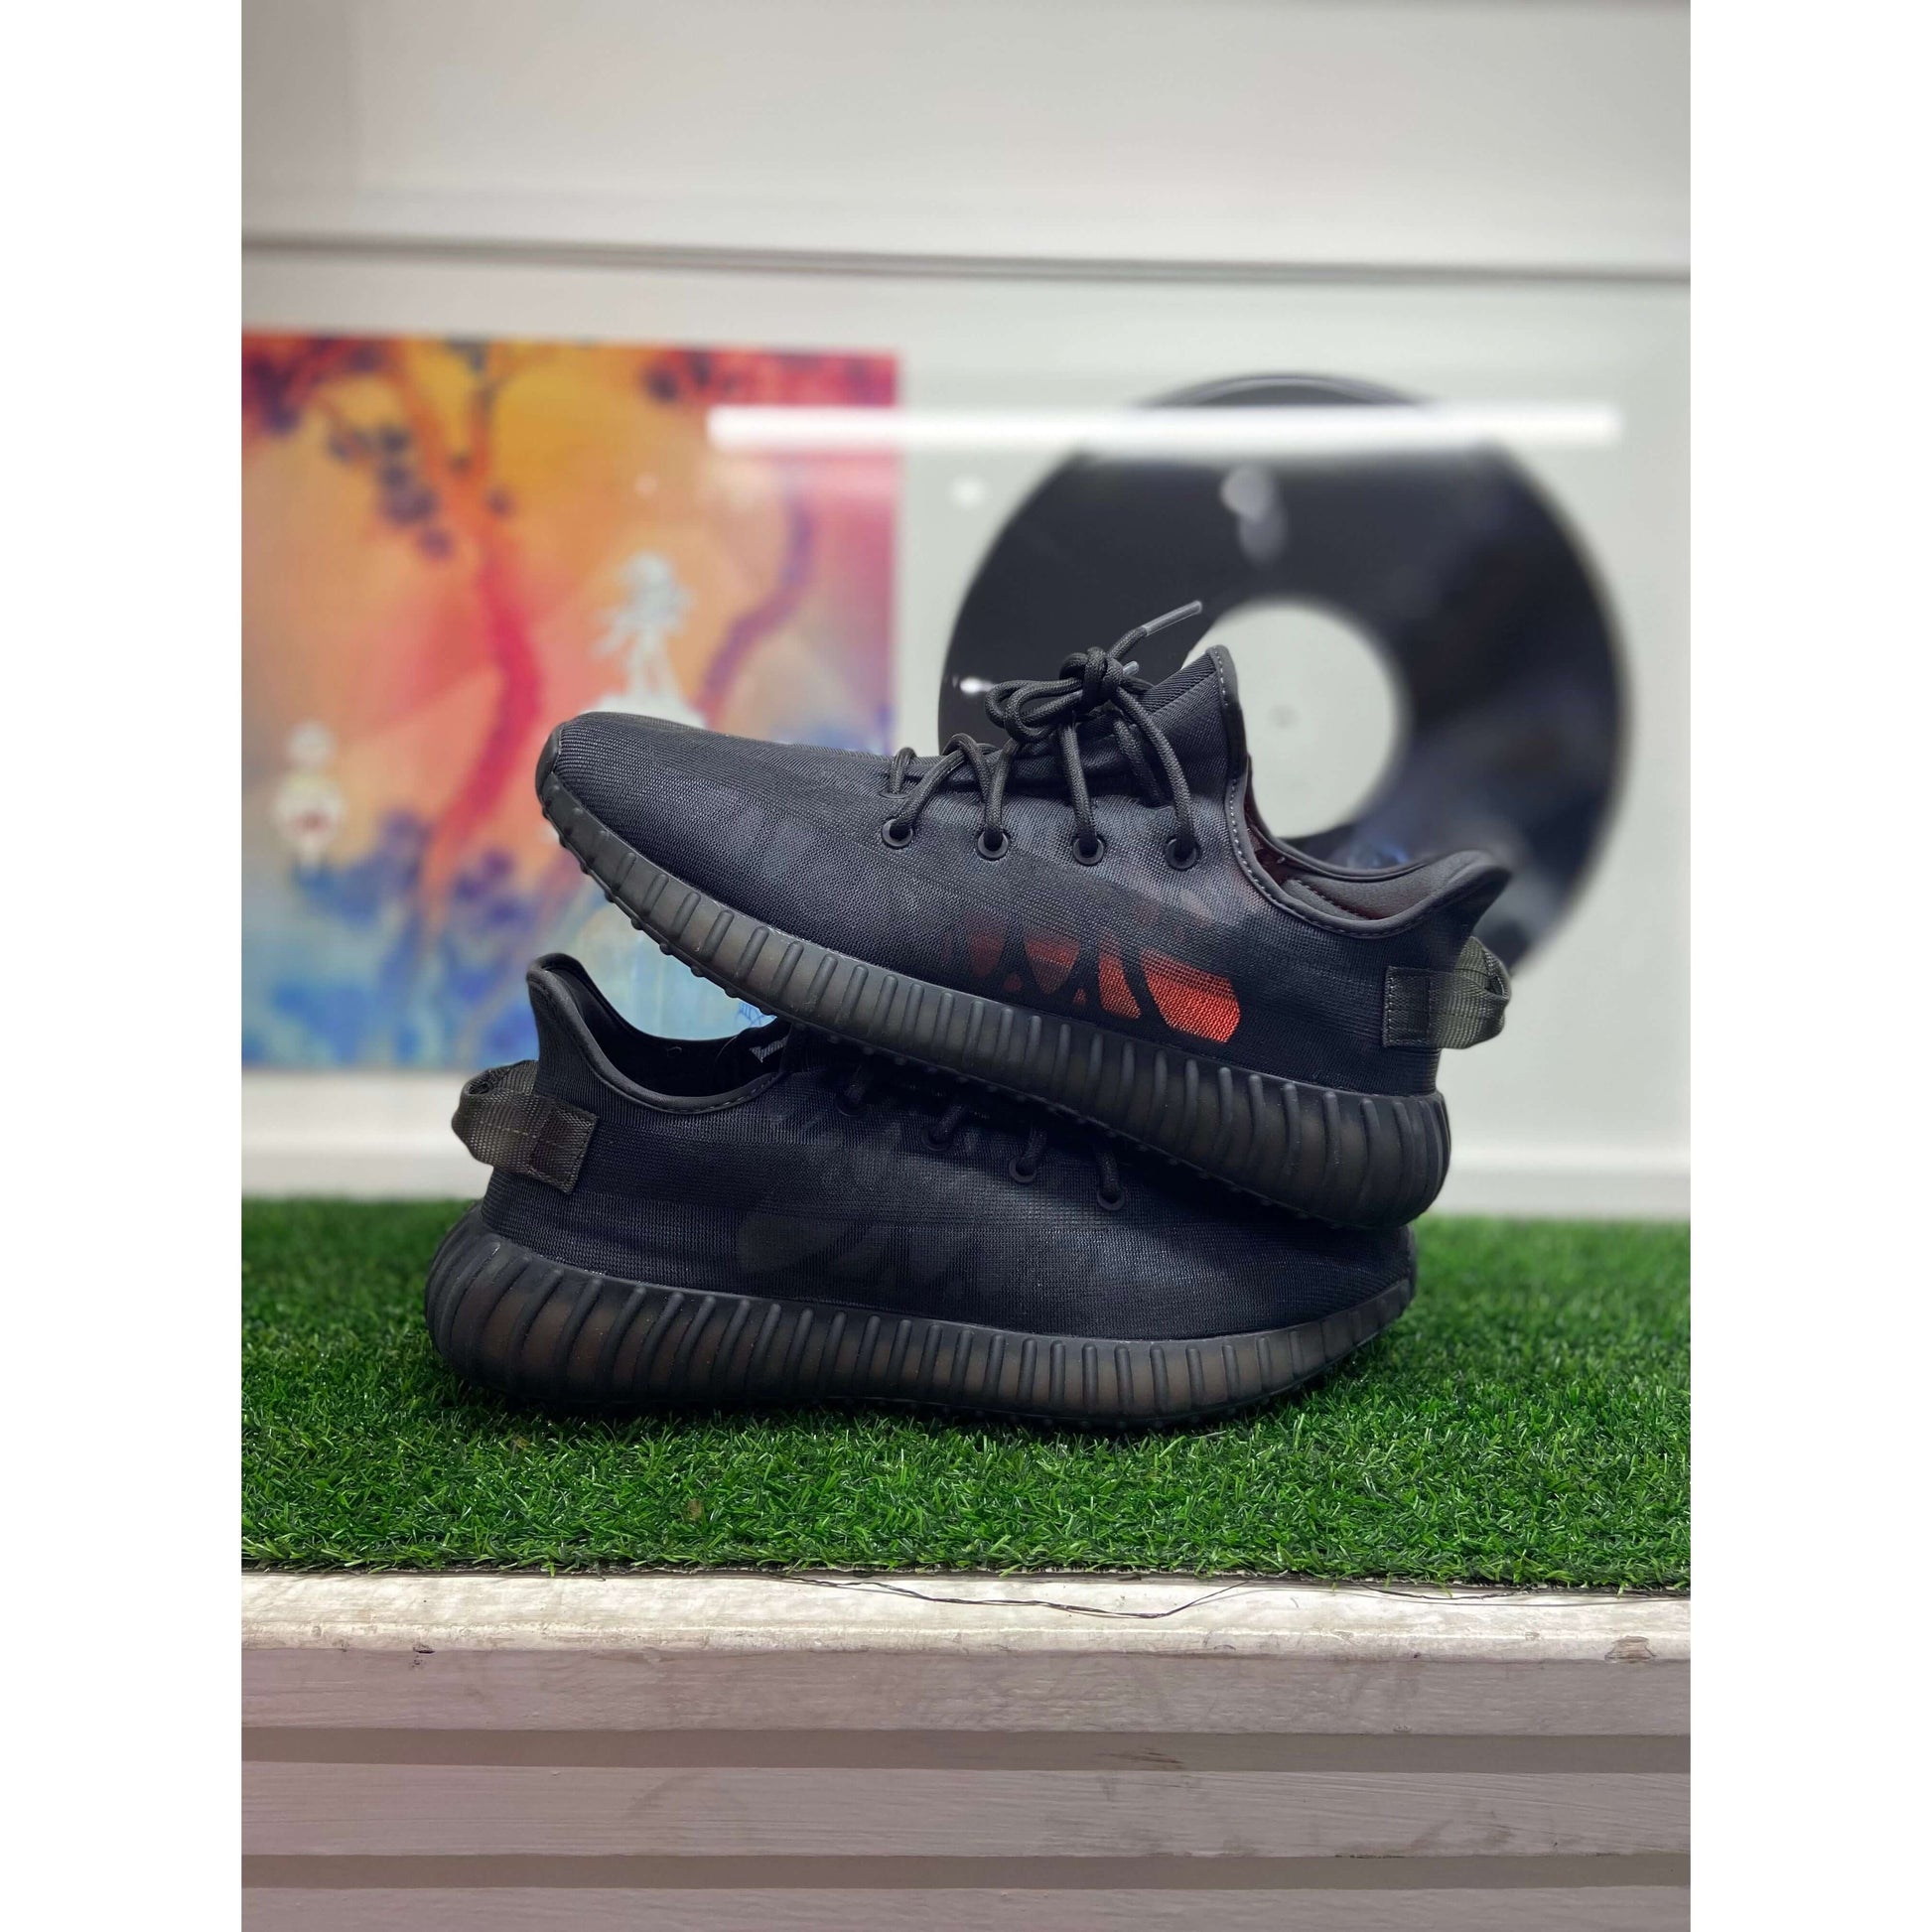 Adidas Yeezy Boost 350 V2 Mono Cinder from Yeezy